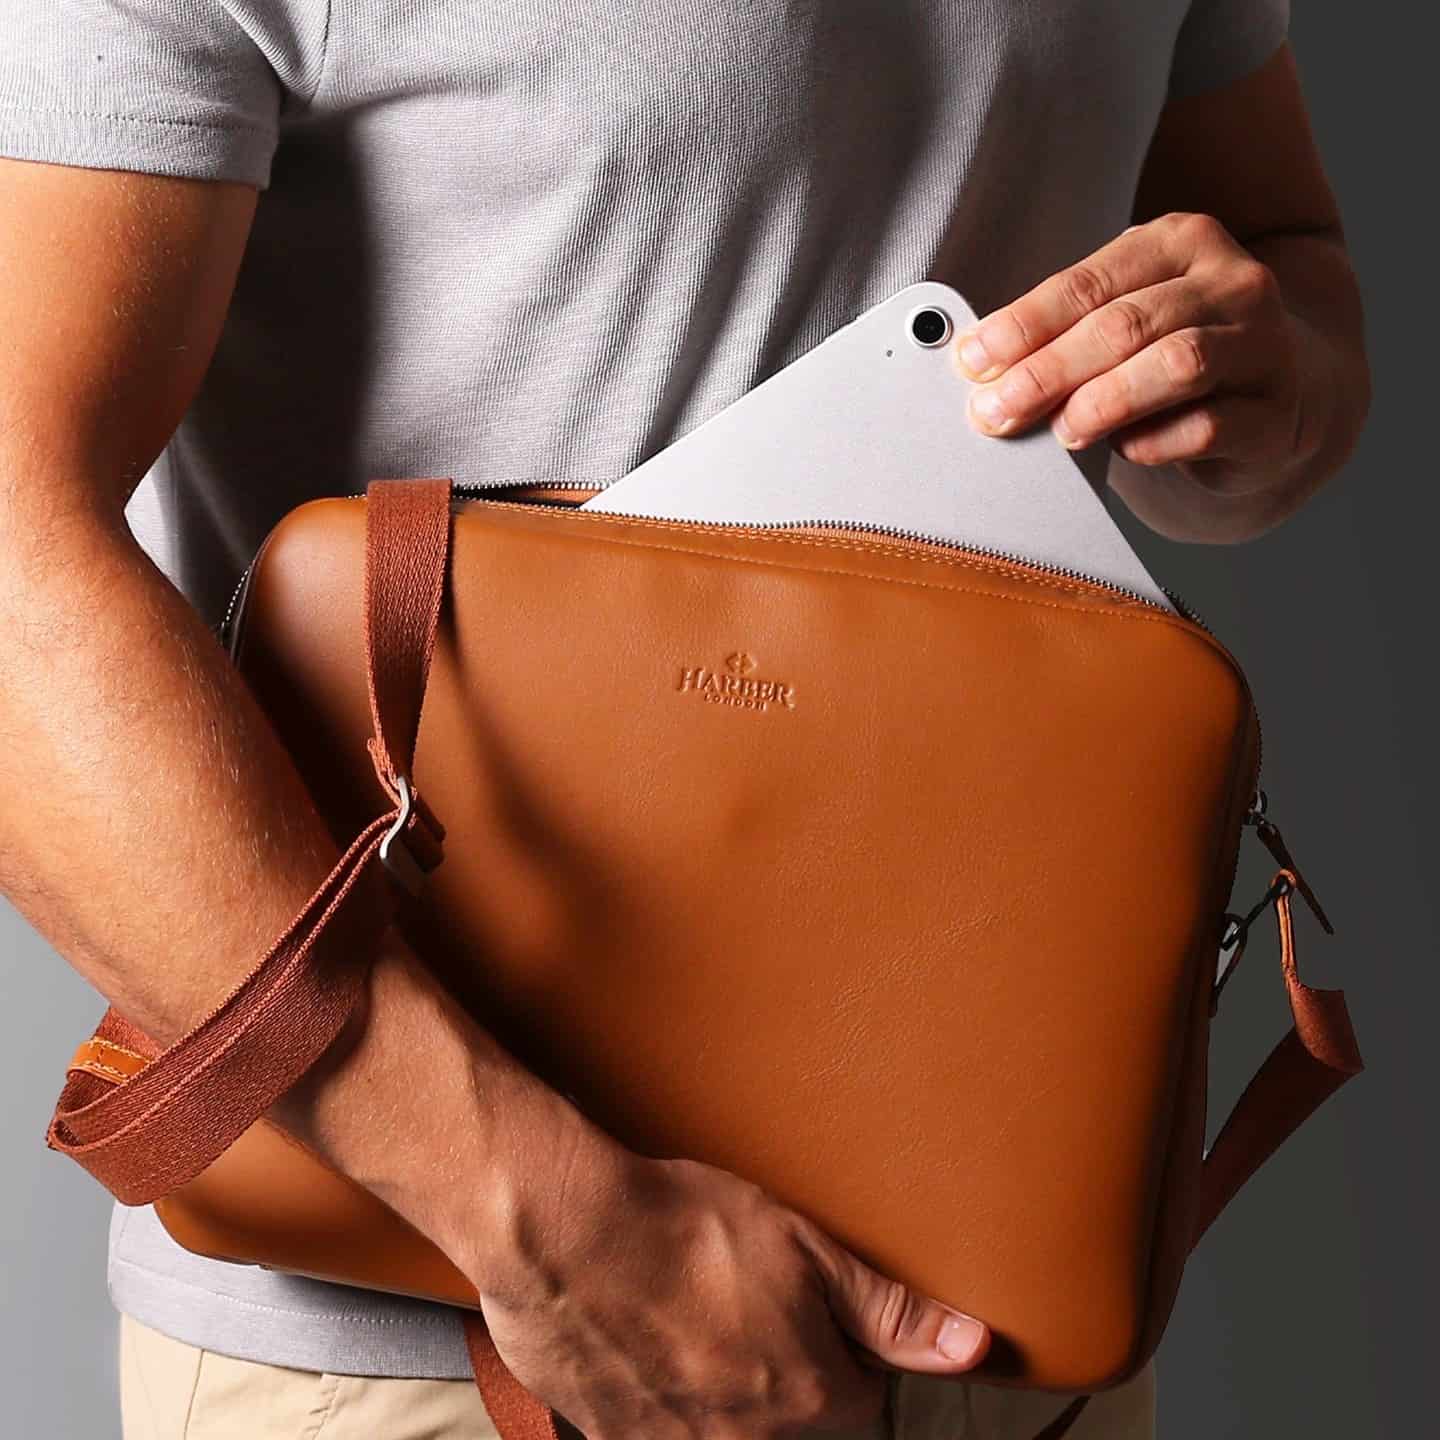 man carrying a leather messenger bag by harber london